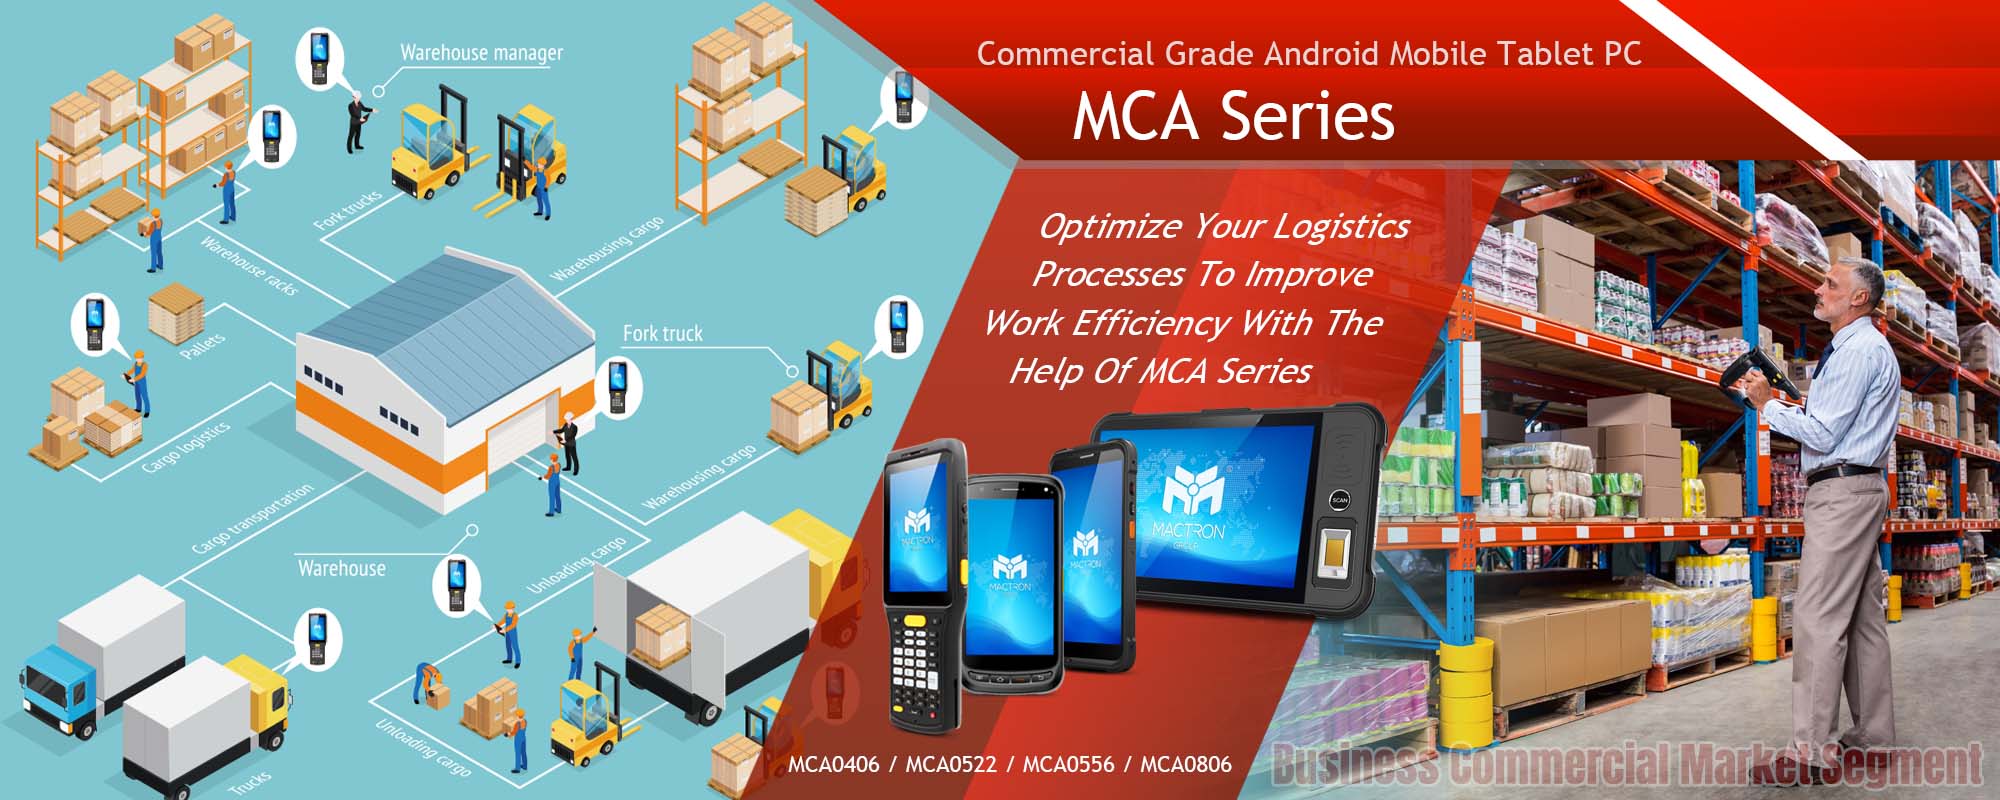 MCA Series - Commercial Grade Android Mobile Tablet PC